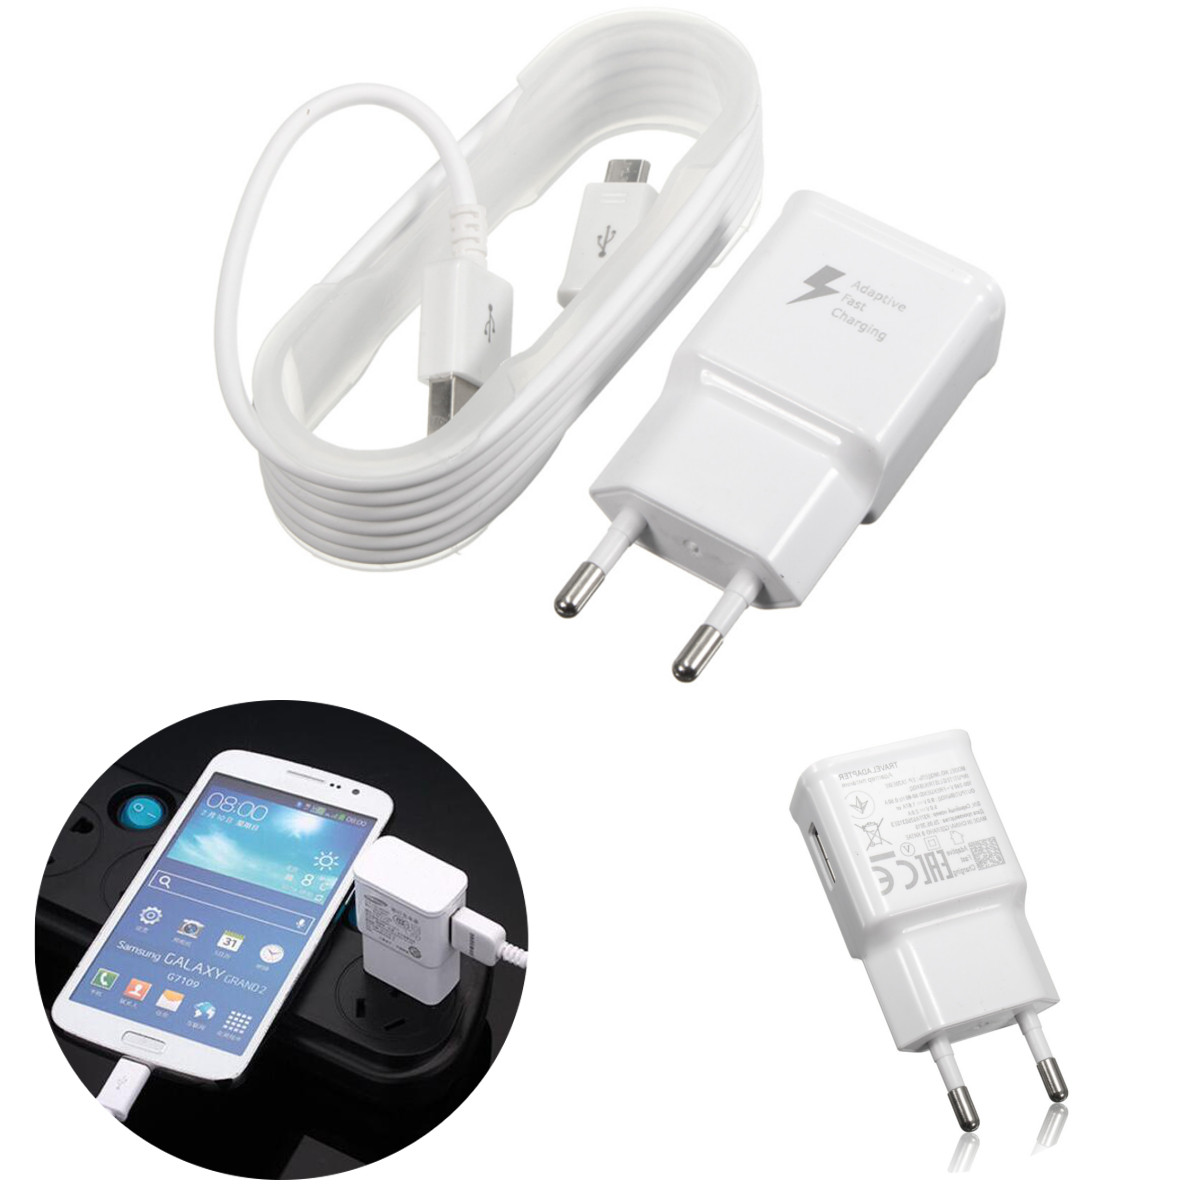 Bakeey-EU-9V-2A-Micro-USB-Charger-Charging-Cable-Adapter-For-Samsung-Xiaomi-Huawei-1111445-2